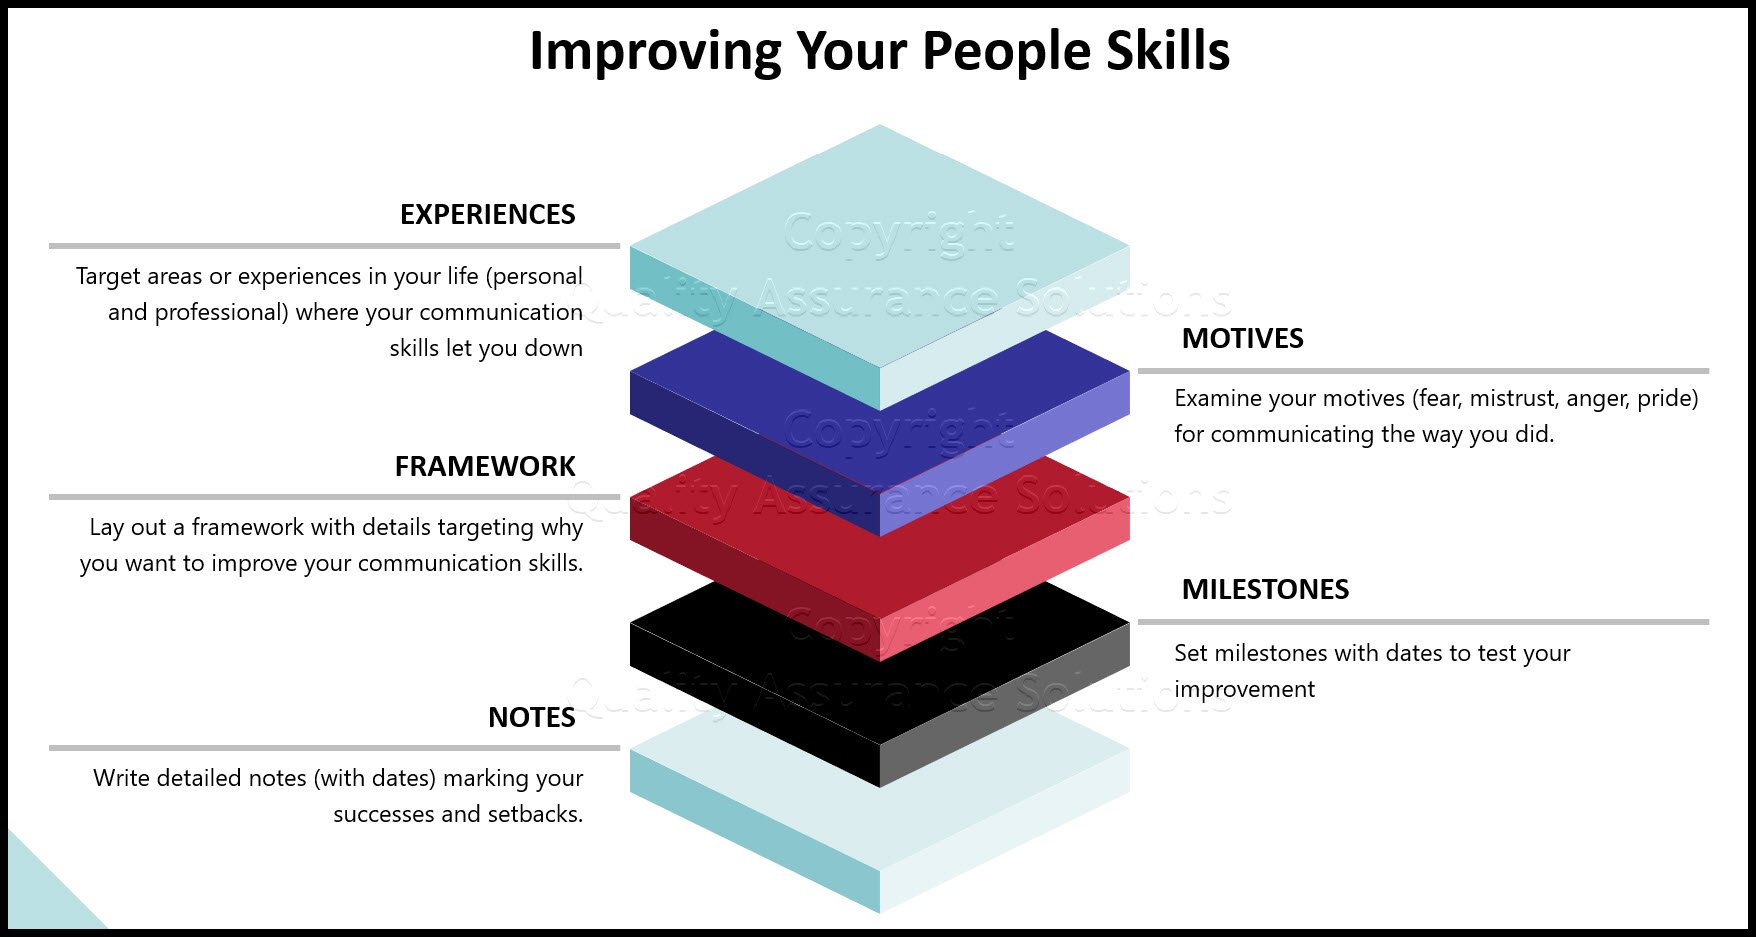 Developing effective people skills is one of the best things you can do to further your career and build your team.